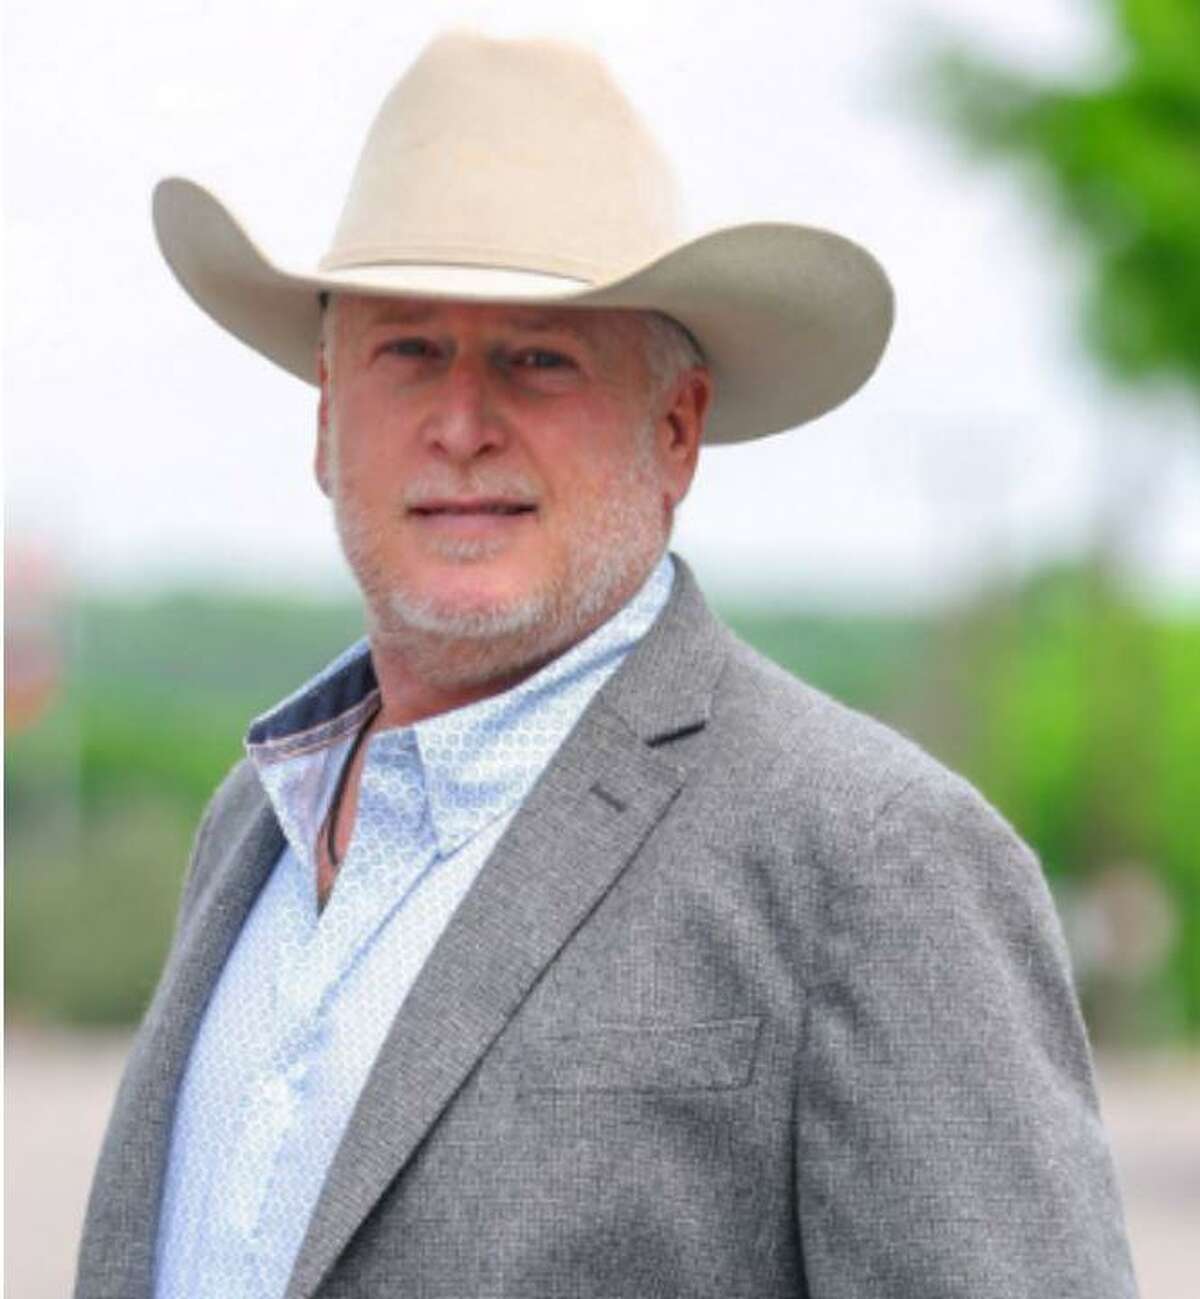 Carey Counsil, a rancher and economics professor from Brenham, is one of two Republicans challenging incumbent Texas Agriculture Commissioner Sid Miller in the March 1 primary election.